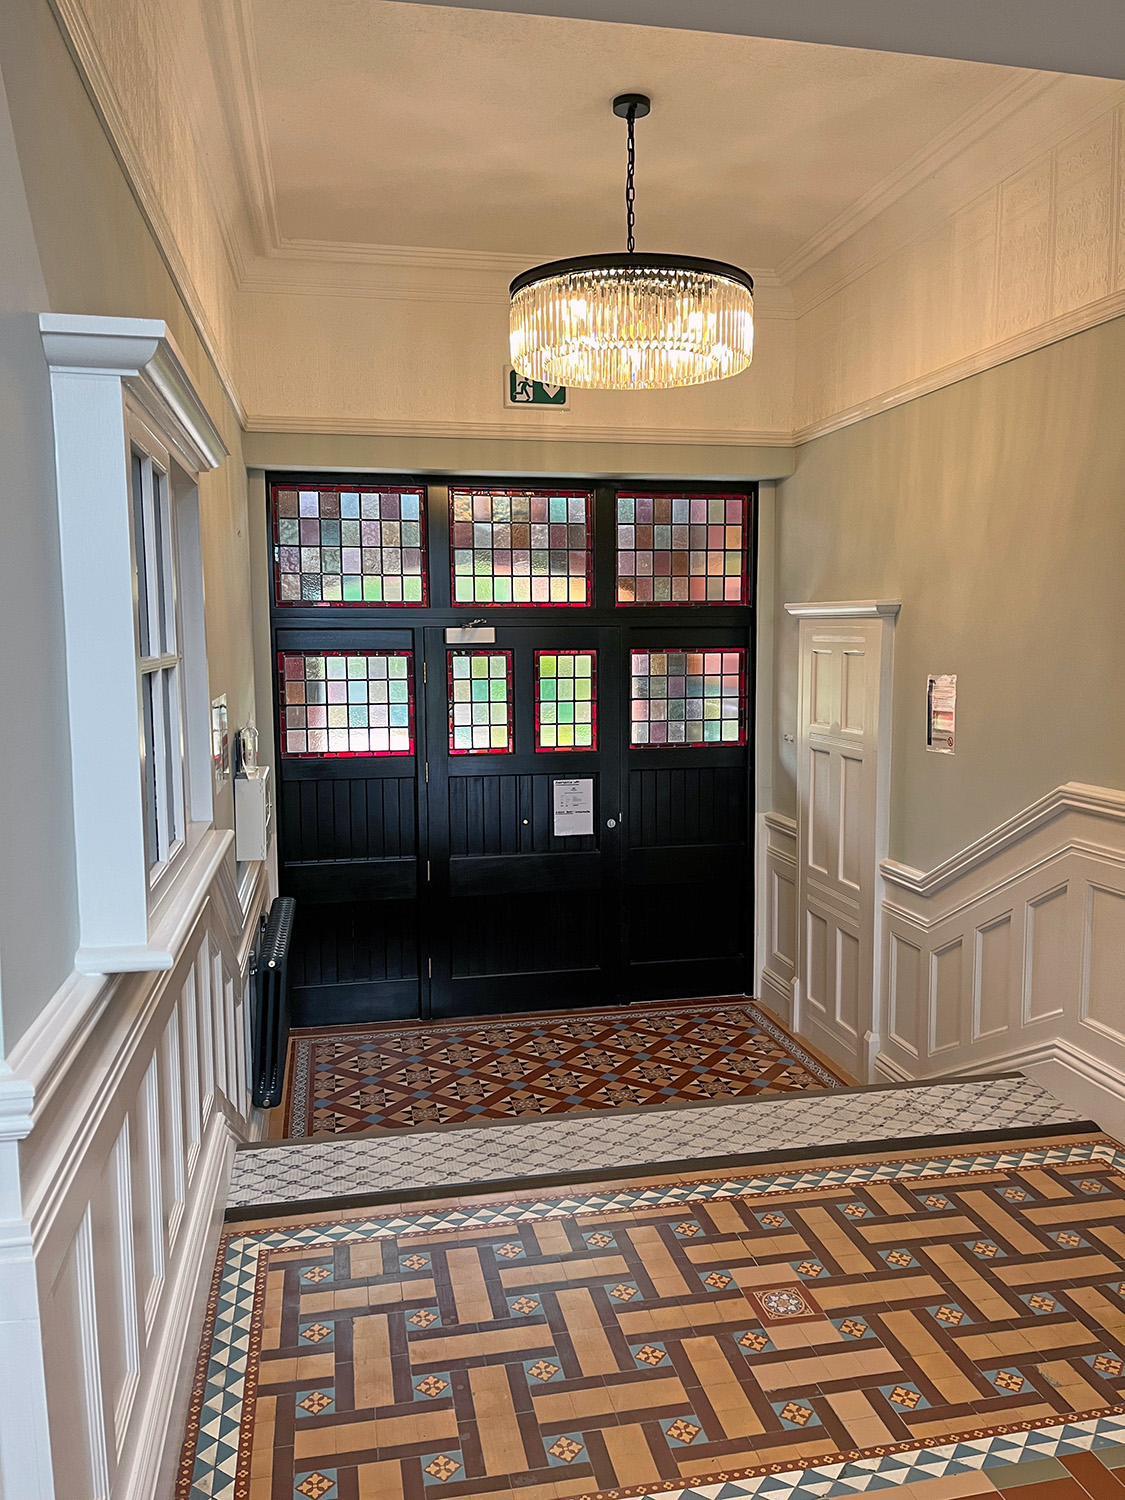 The entryway preserved the colorful tile floors, moldings, and doors with stained glass.